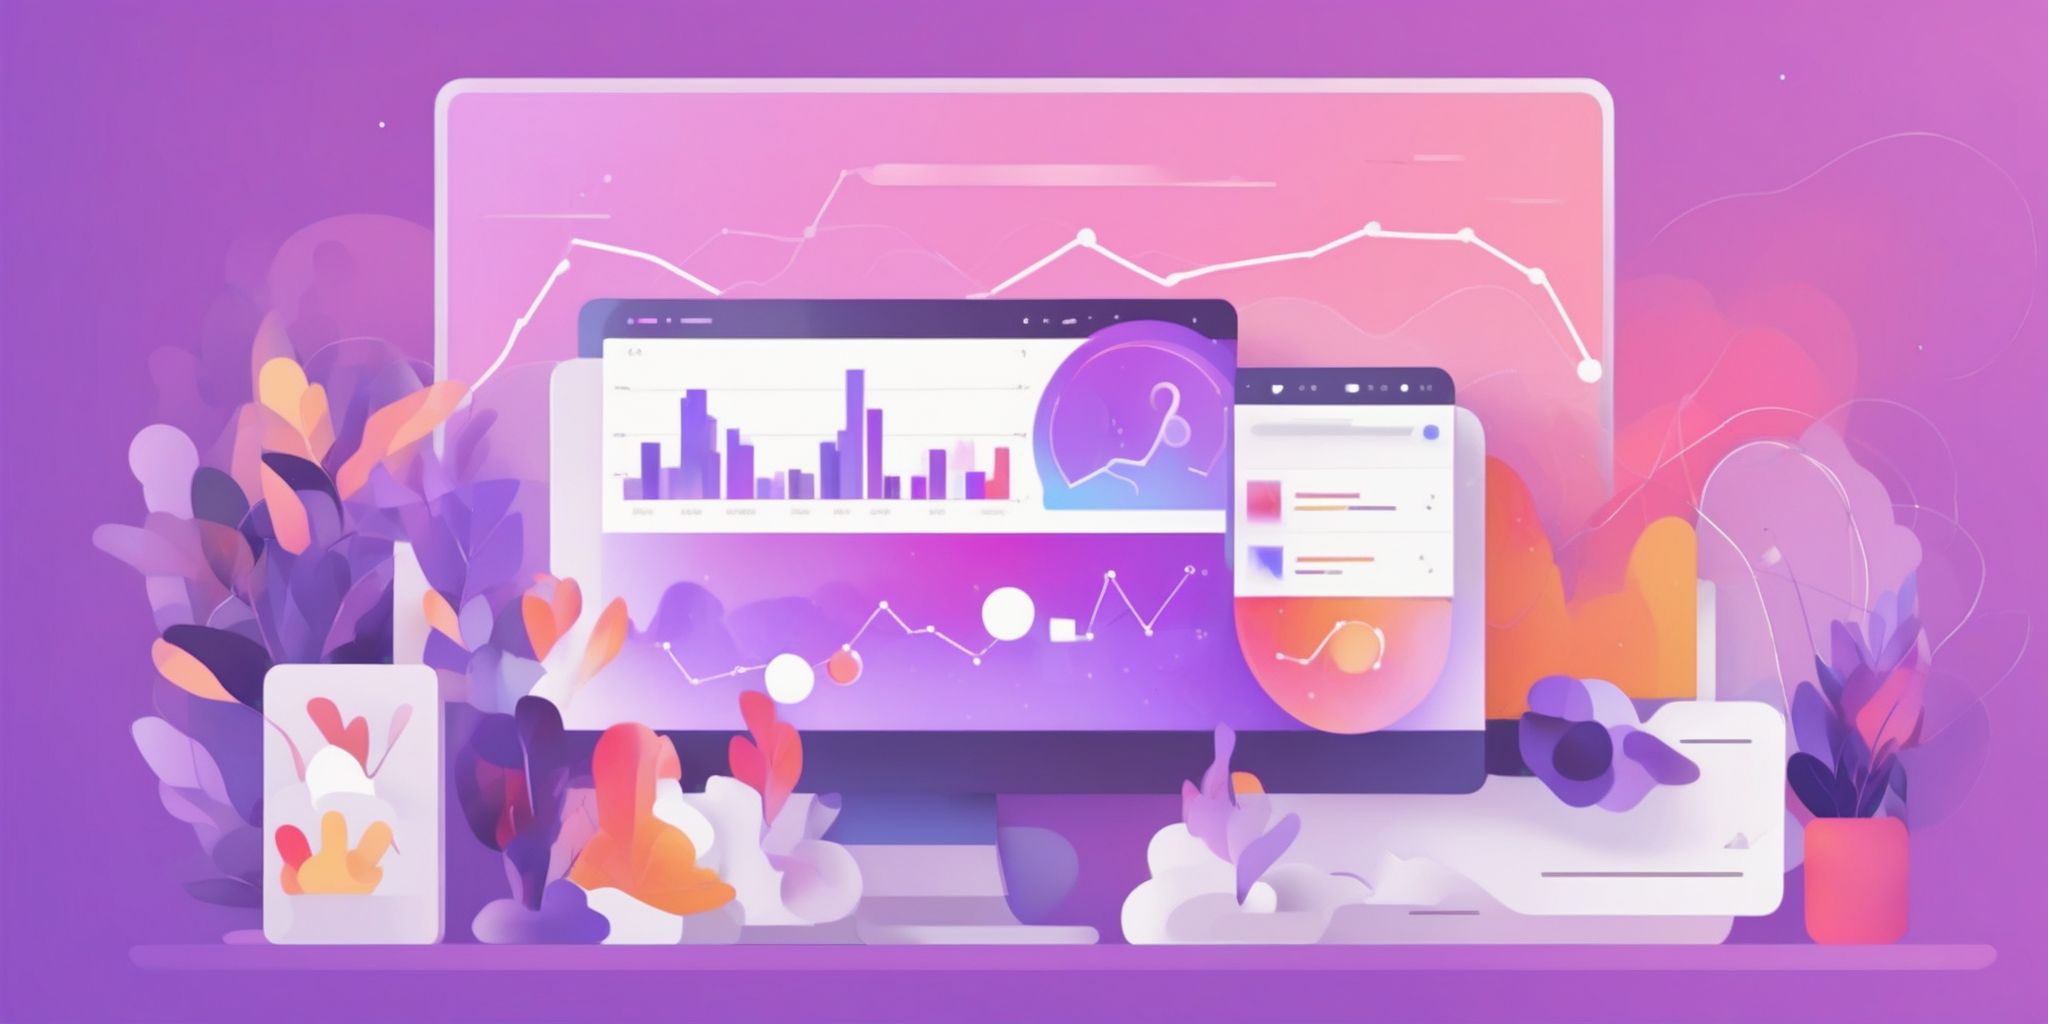 Google search console in flat illustration style, colorful purple gradient colors